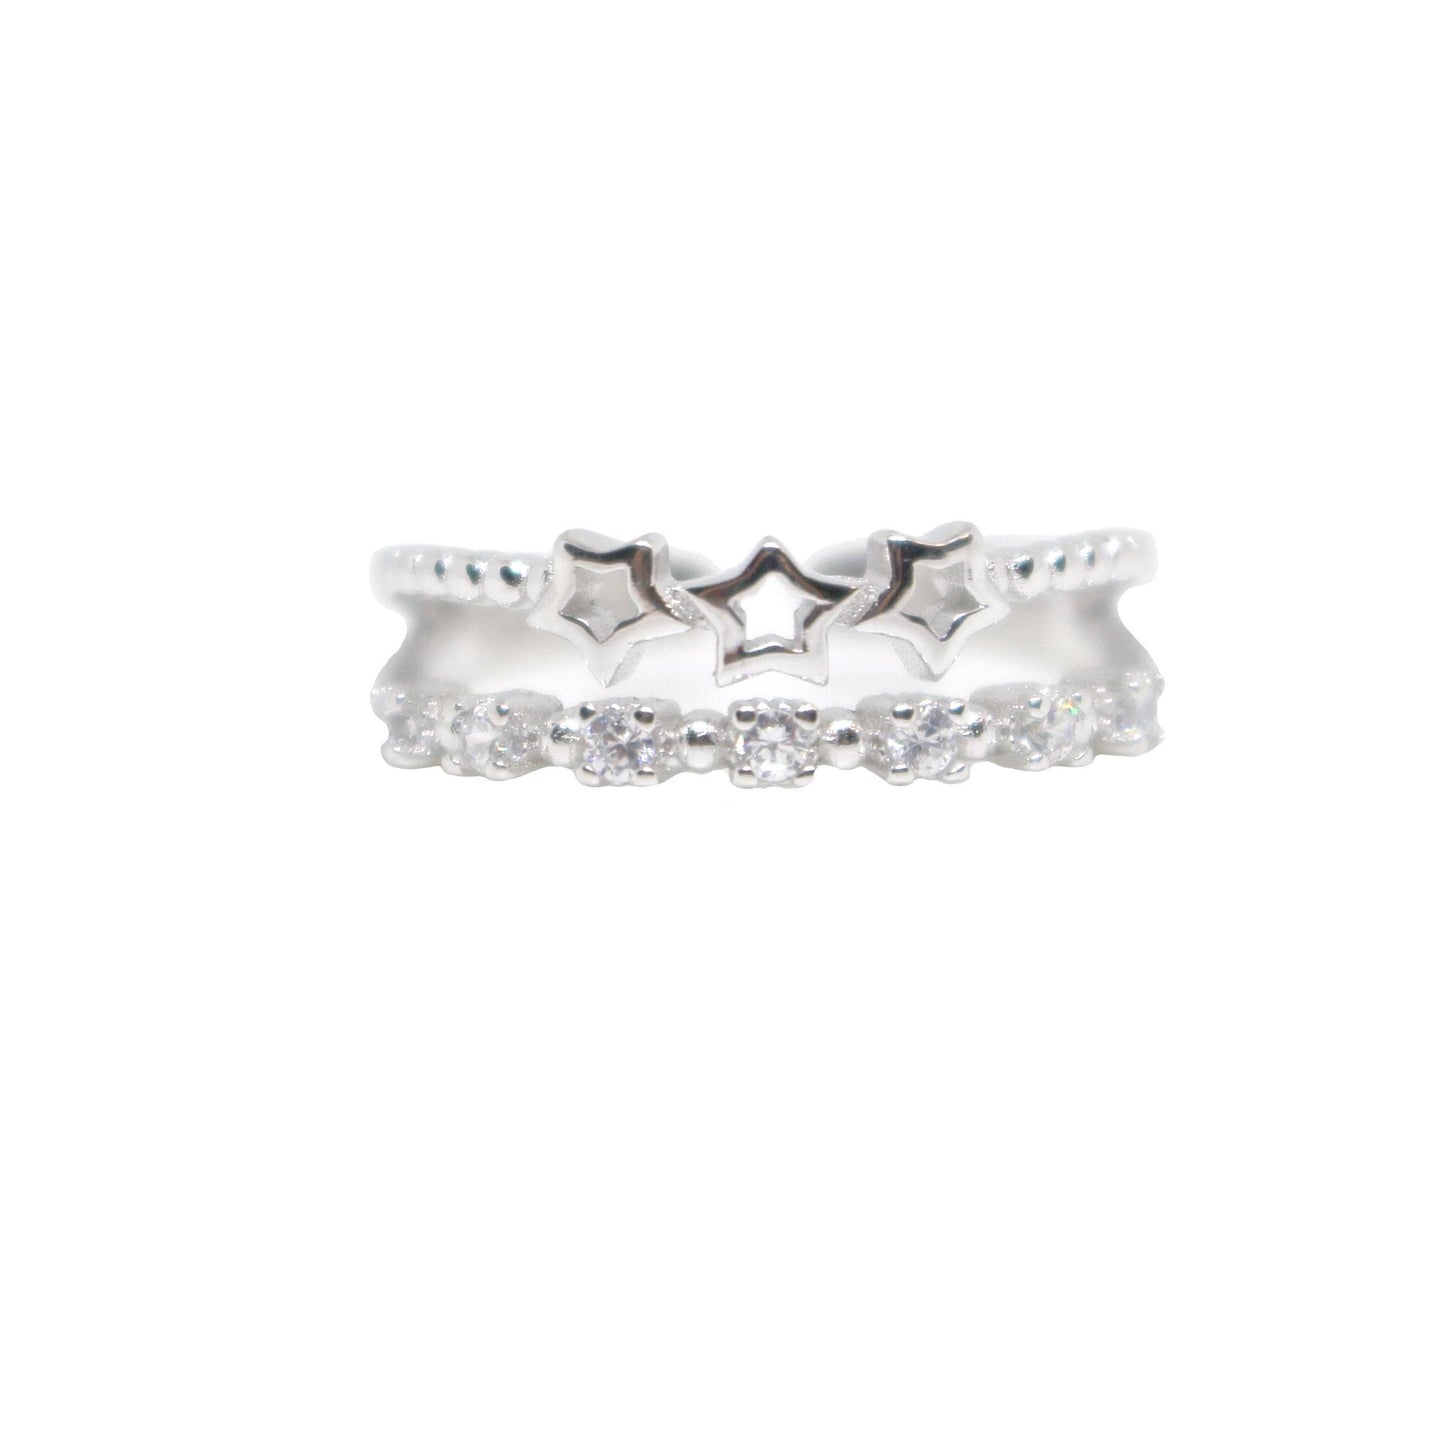 The Lovers - Stars Ring Adjustable Layered Ring | Fashion Hut Jewelry